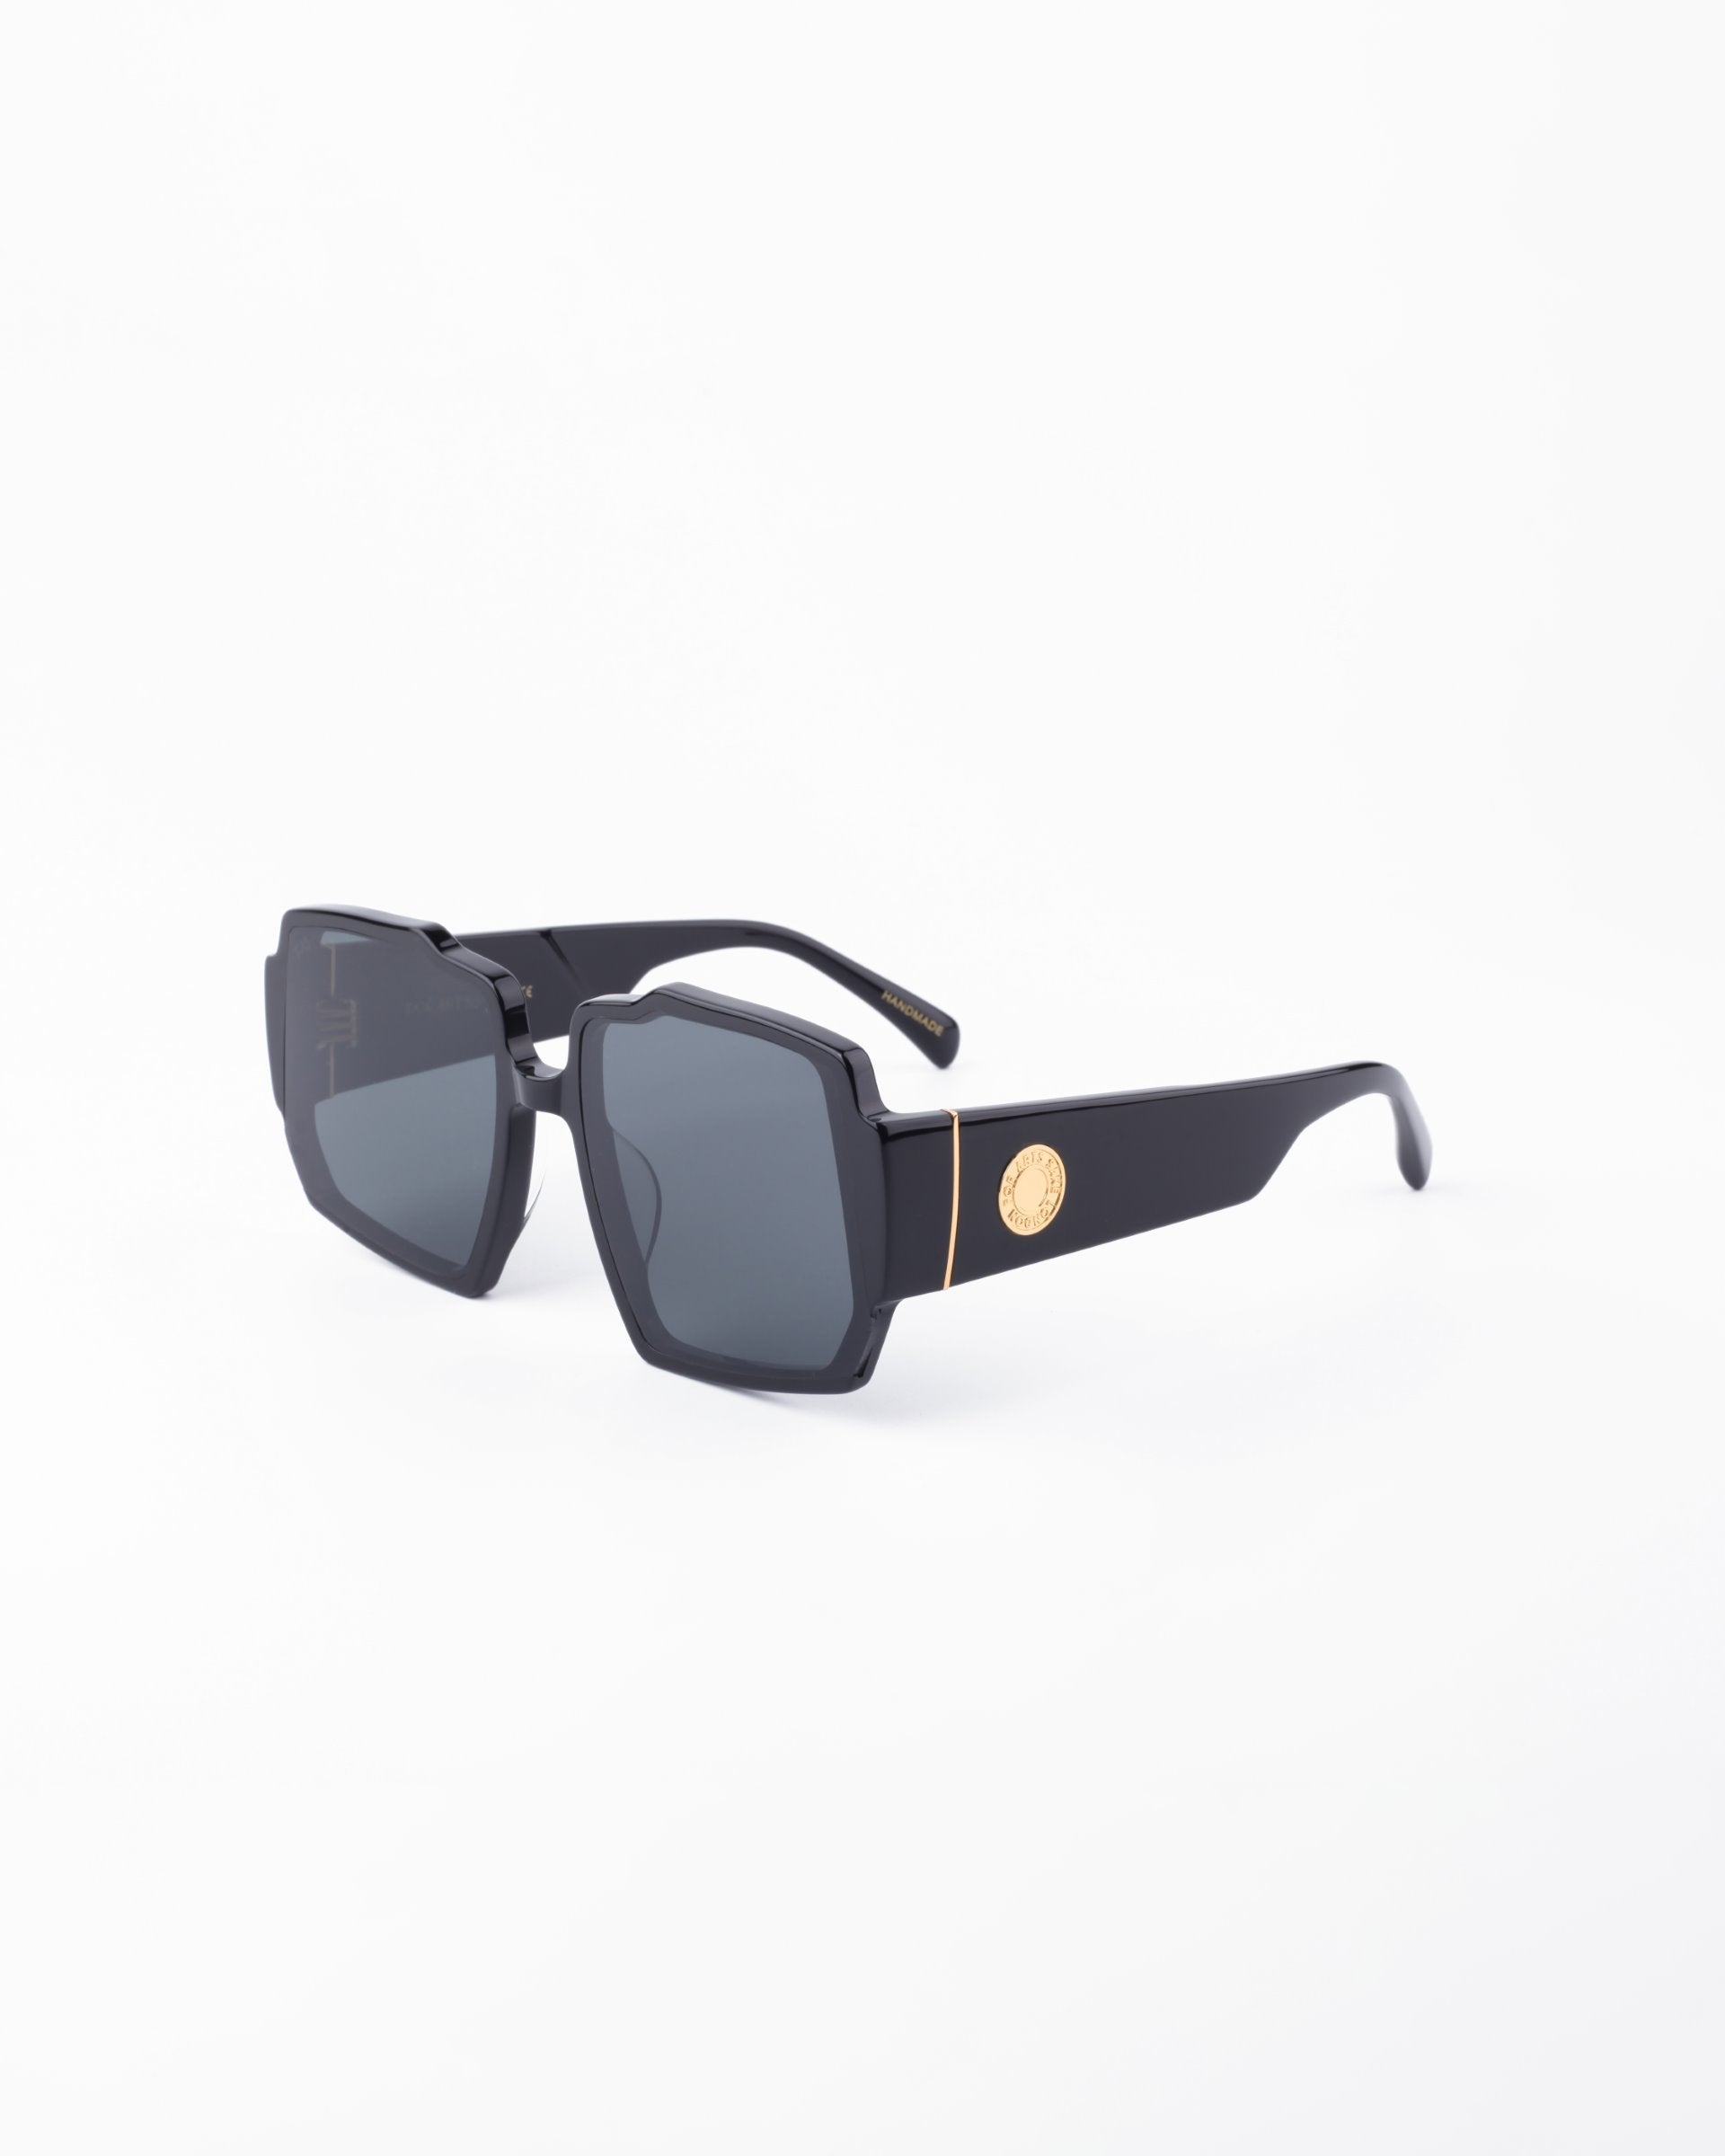 Black oversized sunglasses with chunky acetate frames, featuring gold accents on the temples. The UV-protected lenses are dark and slightly reflective. The overall style is bold and modern, suitable for fashion-forward wear. Introducing the Moritz by For Art&#39;s Sake®. The background is plain white.